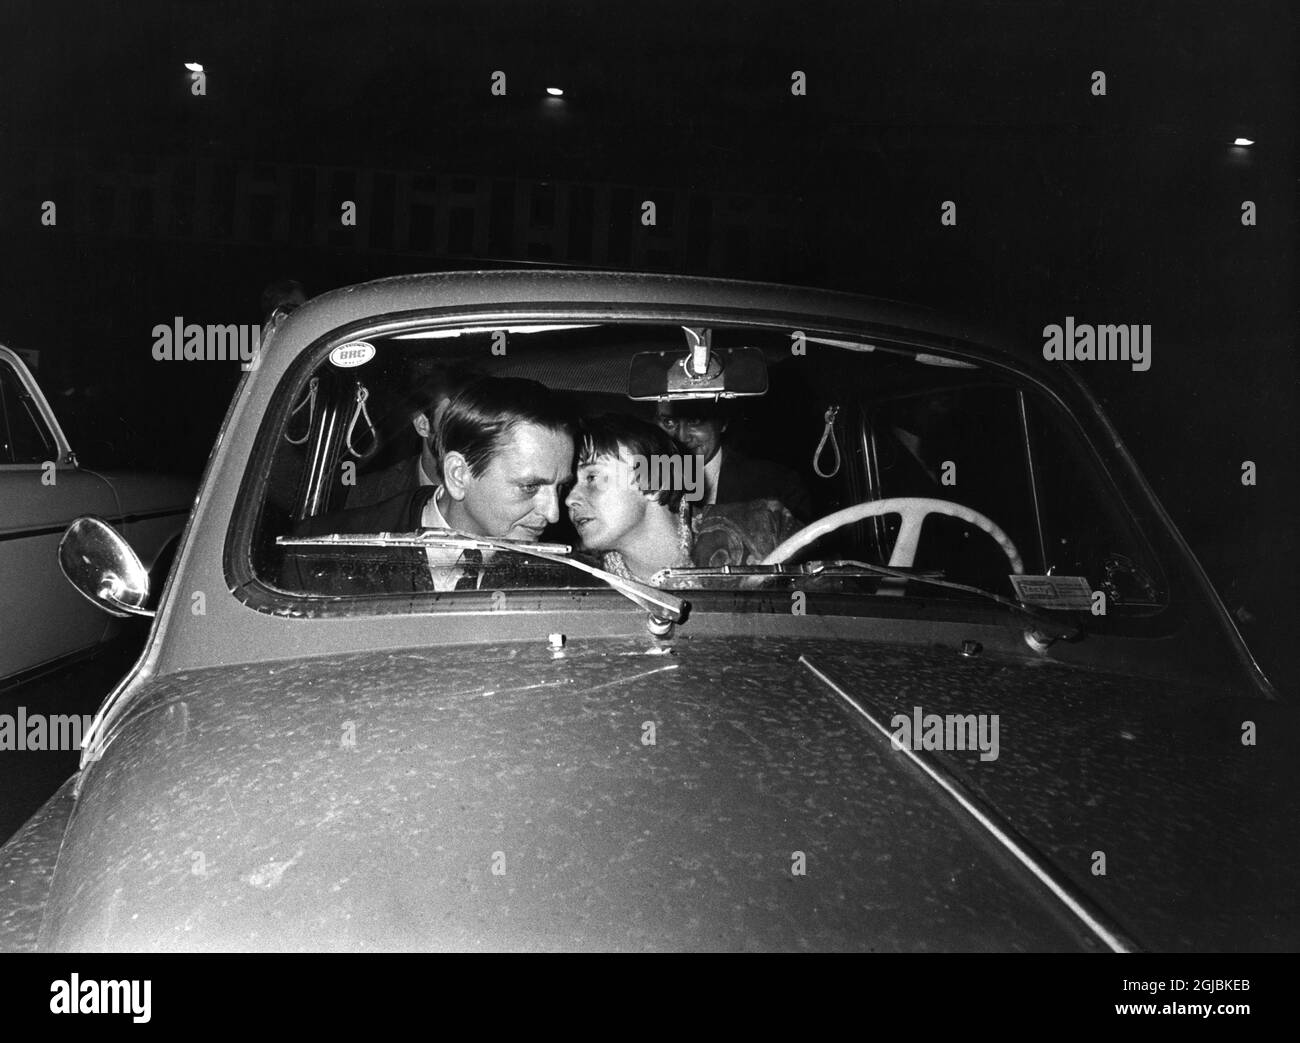 1970. Lisbet Palme widow of murdered Swedish Prime Minister Olof Palme has died 87 years old. Pictures shows Olof Palme and Lisbet in a car Foto: Bonnierarkivet / SCANPIX / Kod: 3001 Stock Photo